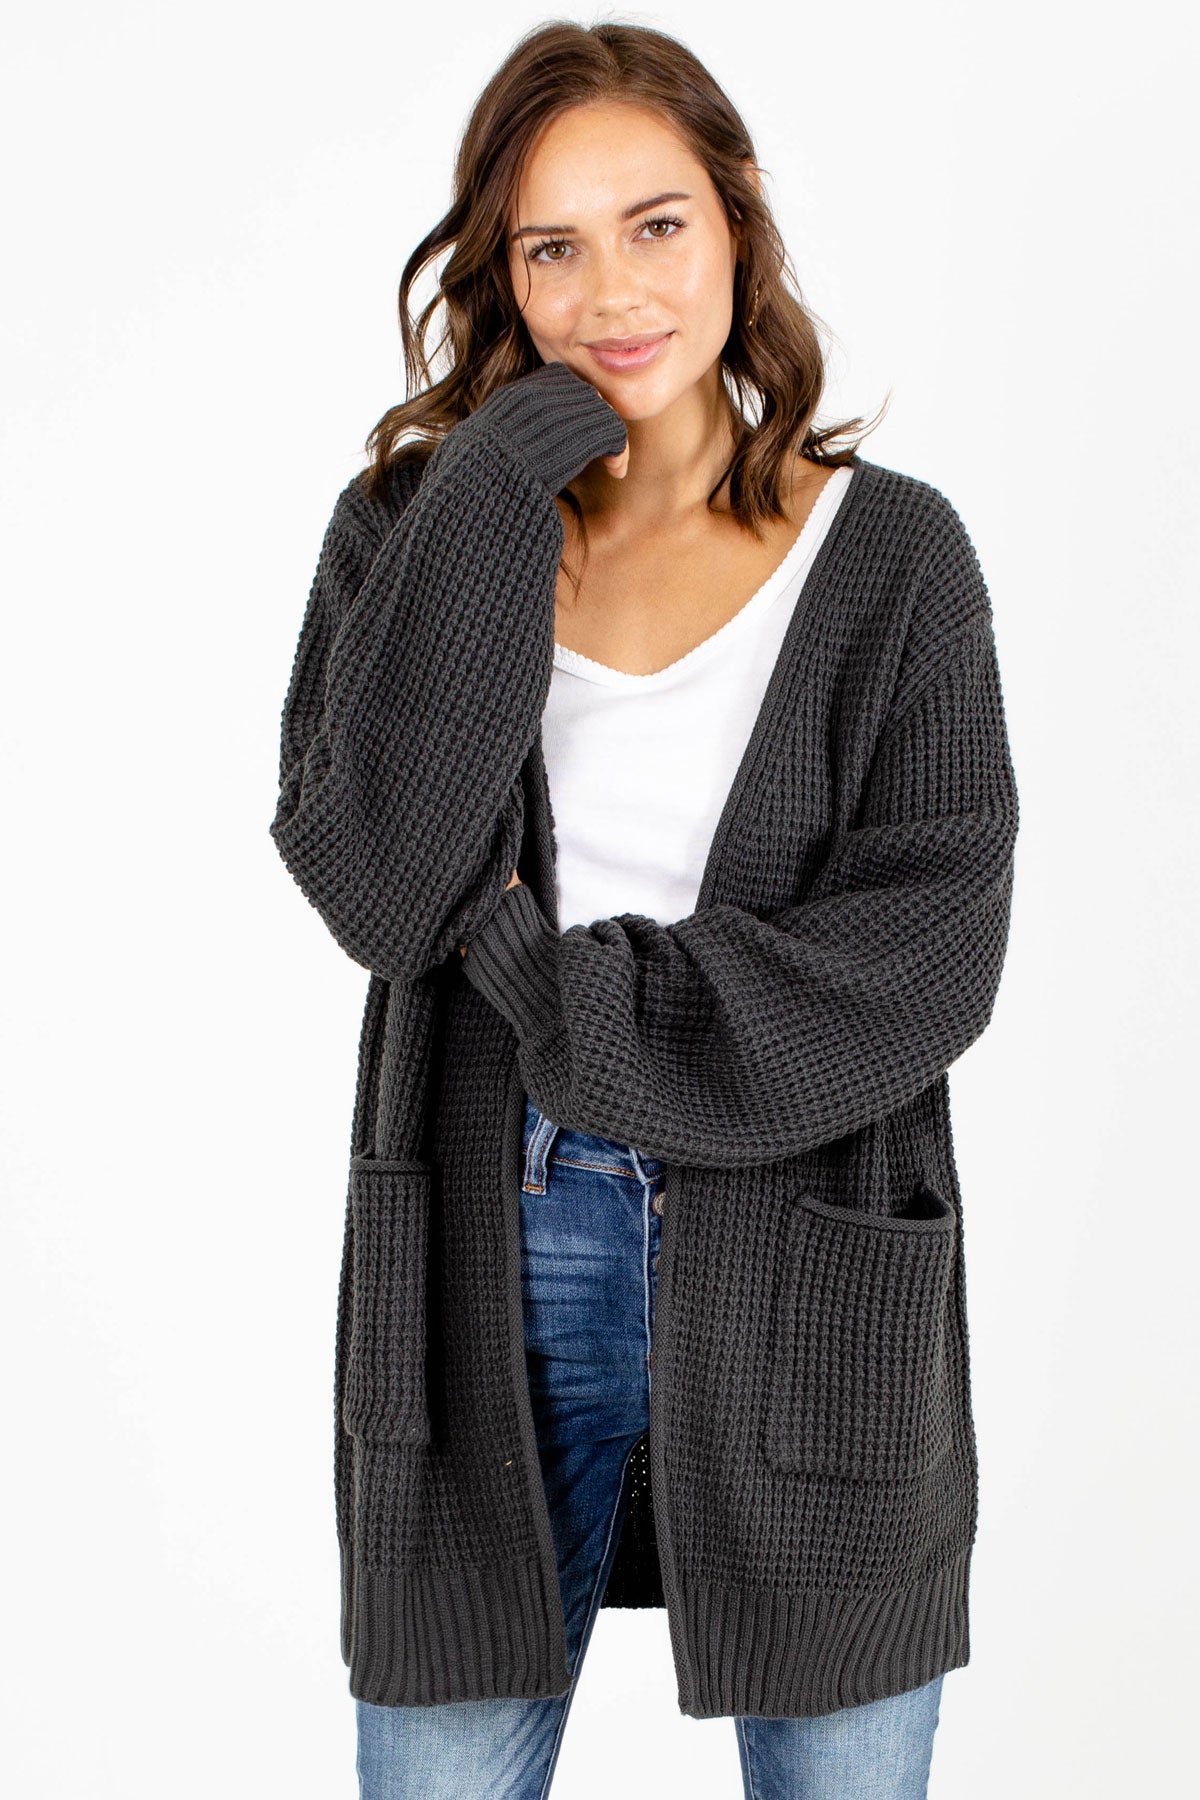 Gray Long Sleeve Boutique Cardigans for Women